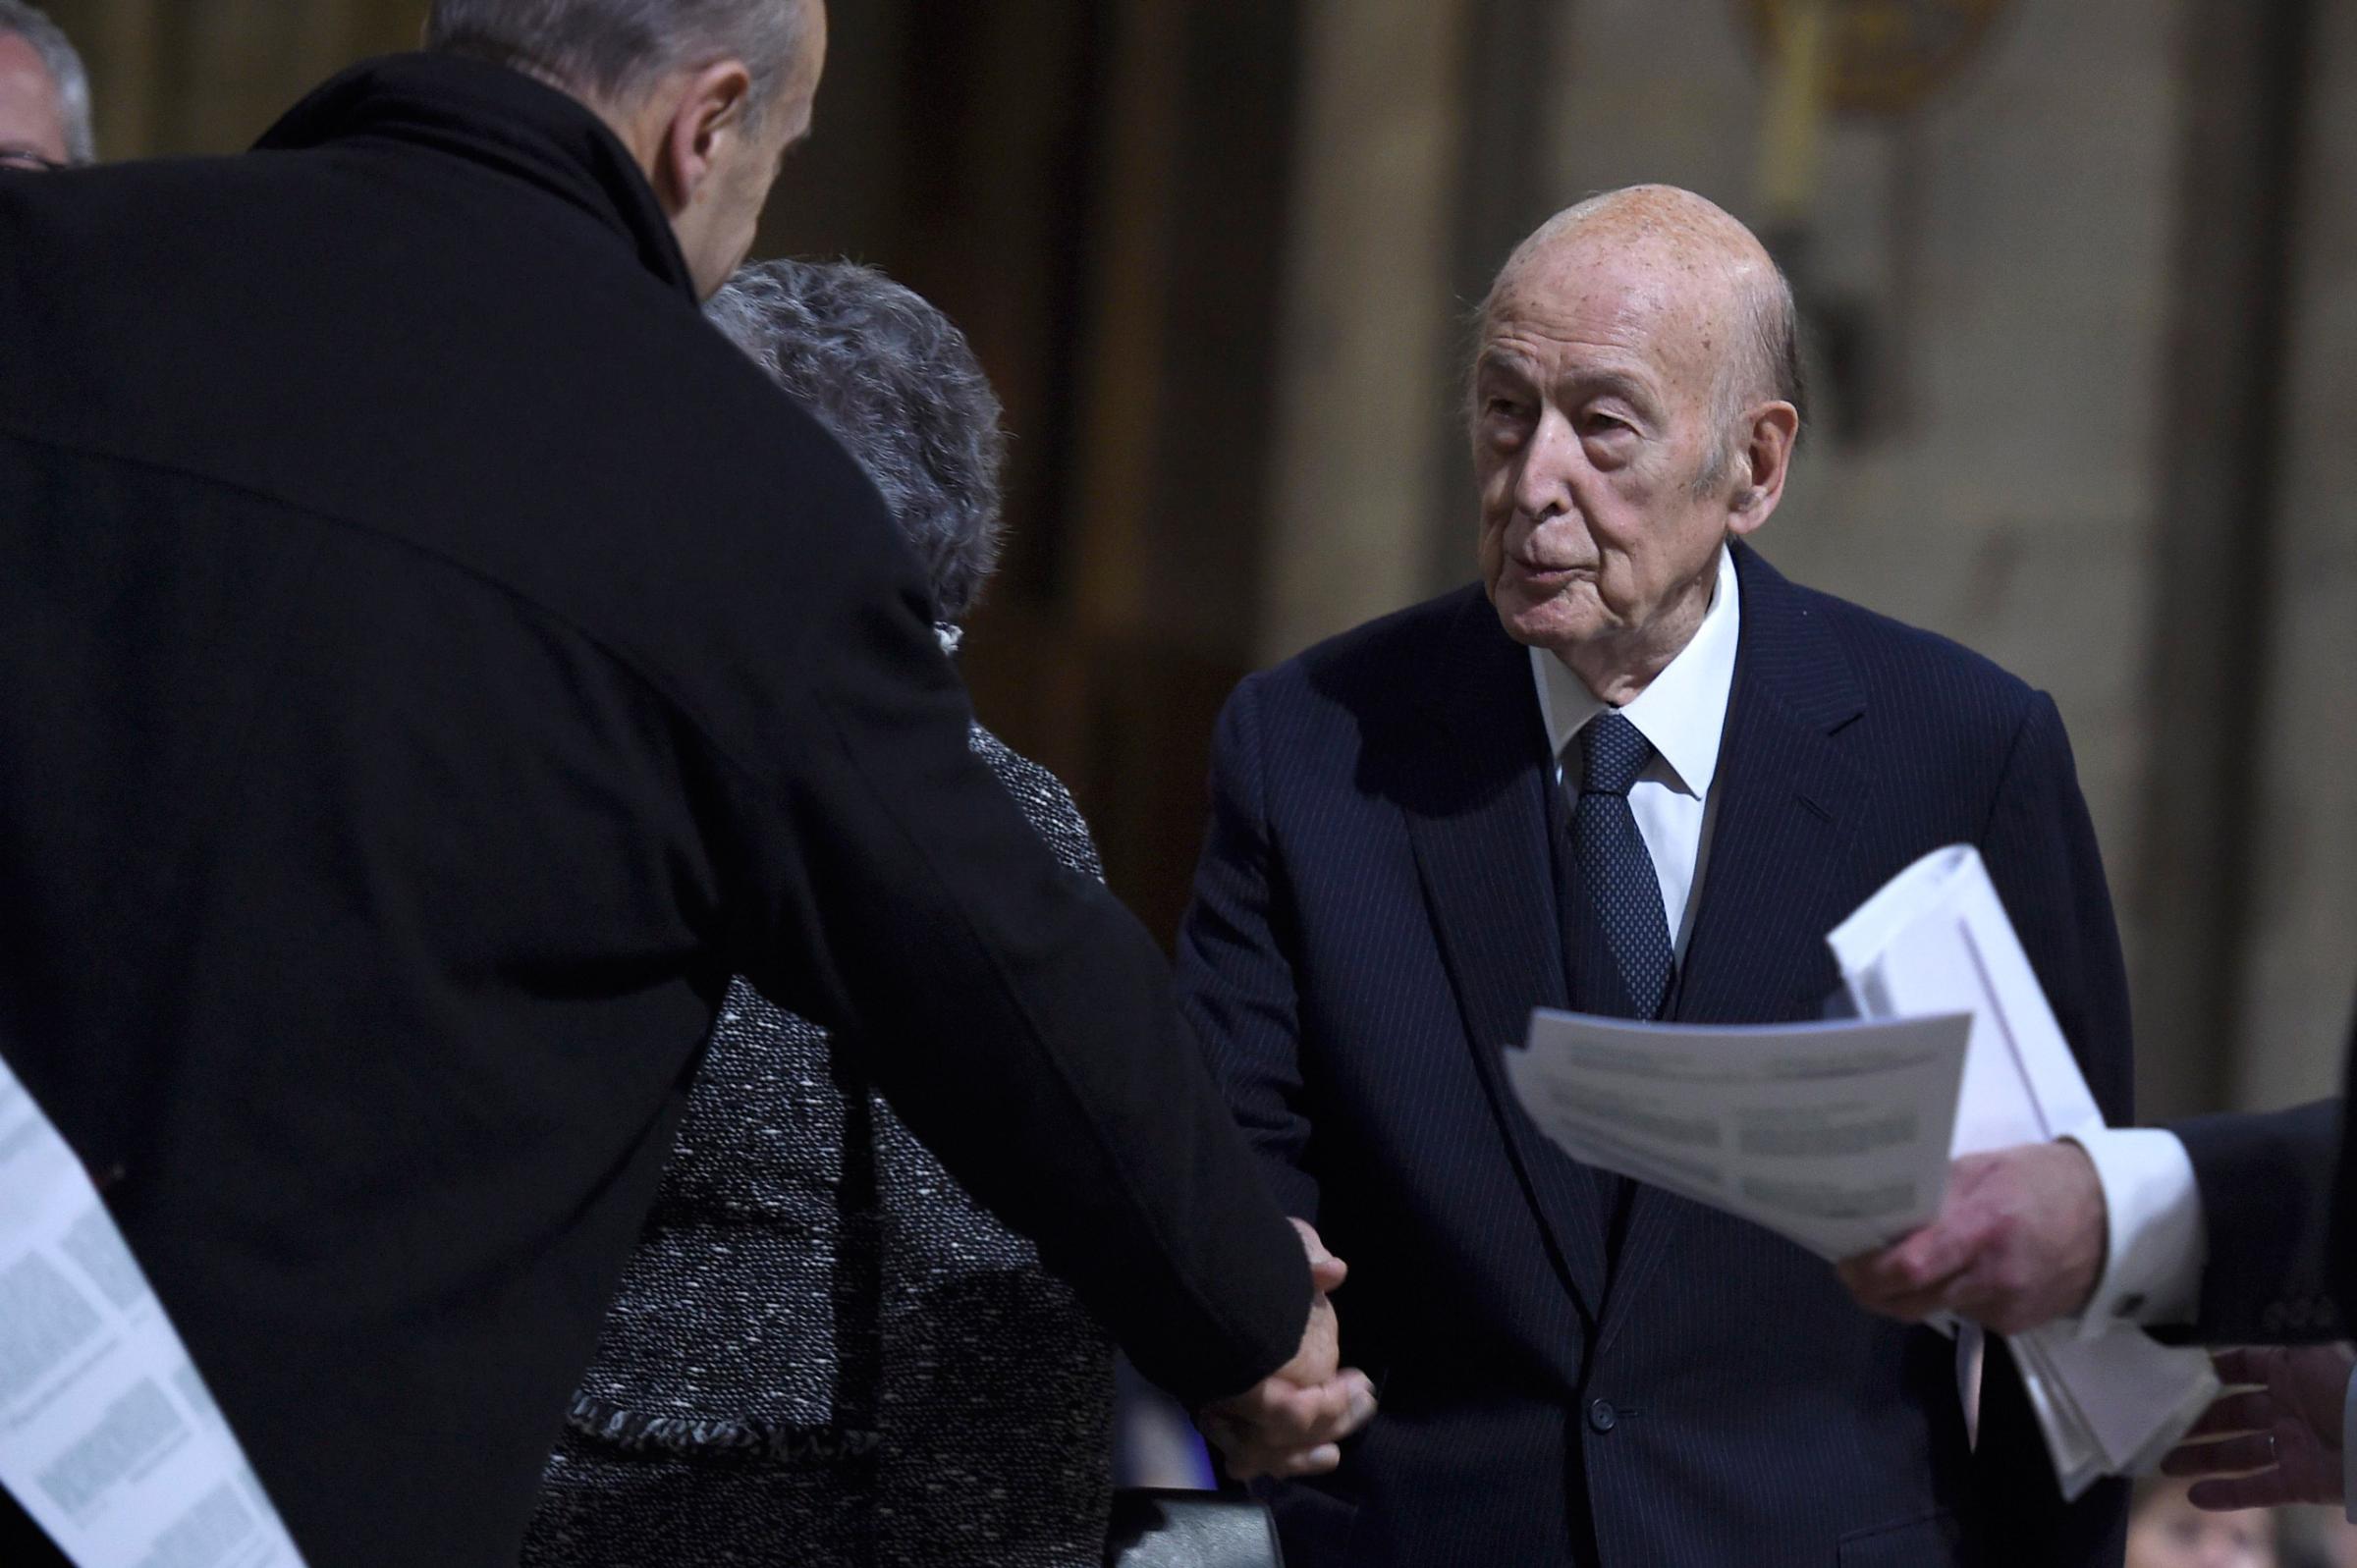 Former French President Valery Giscard d'Estaing arrives to attend mass at the Notre Dame Cathedral in Paris, France, November 15, 2015, that is held in homage to the victims of a series of fatal shootings in the French capital on Friday. REUTERS/Lionel Bonaventure/Pool